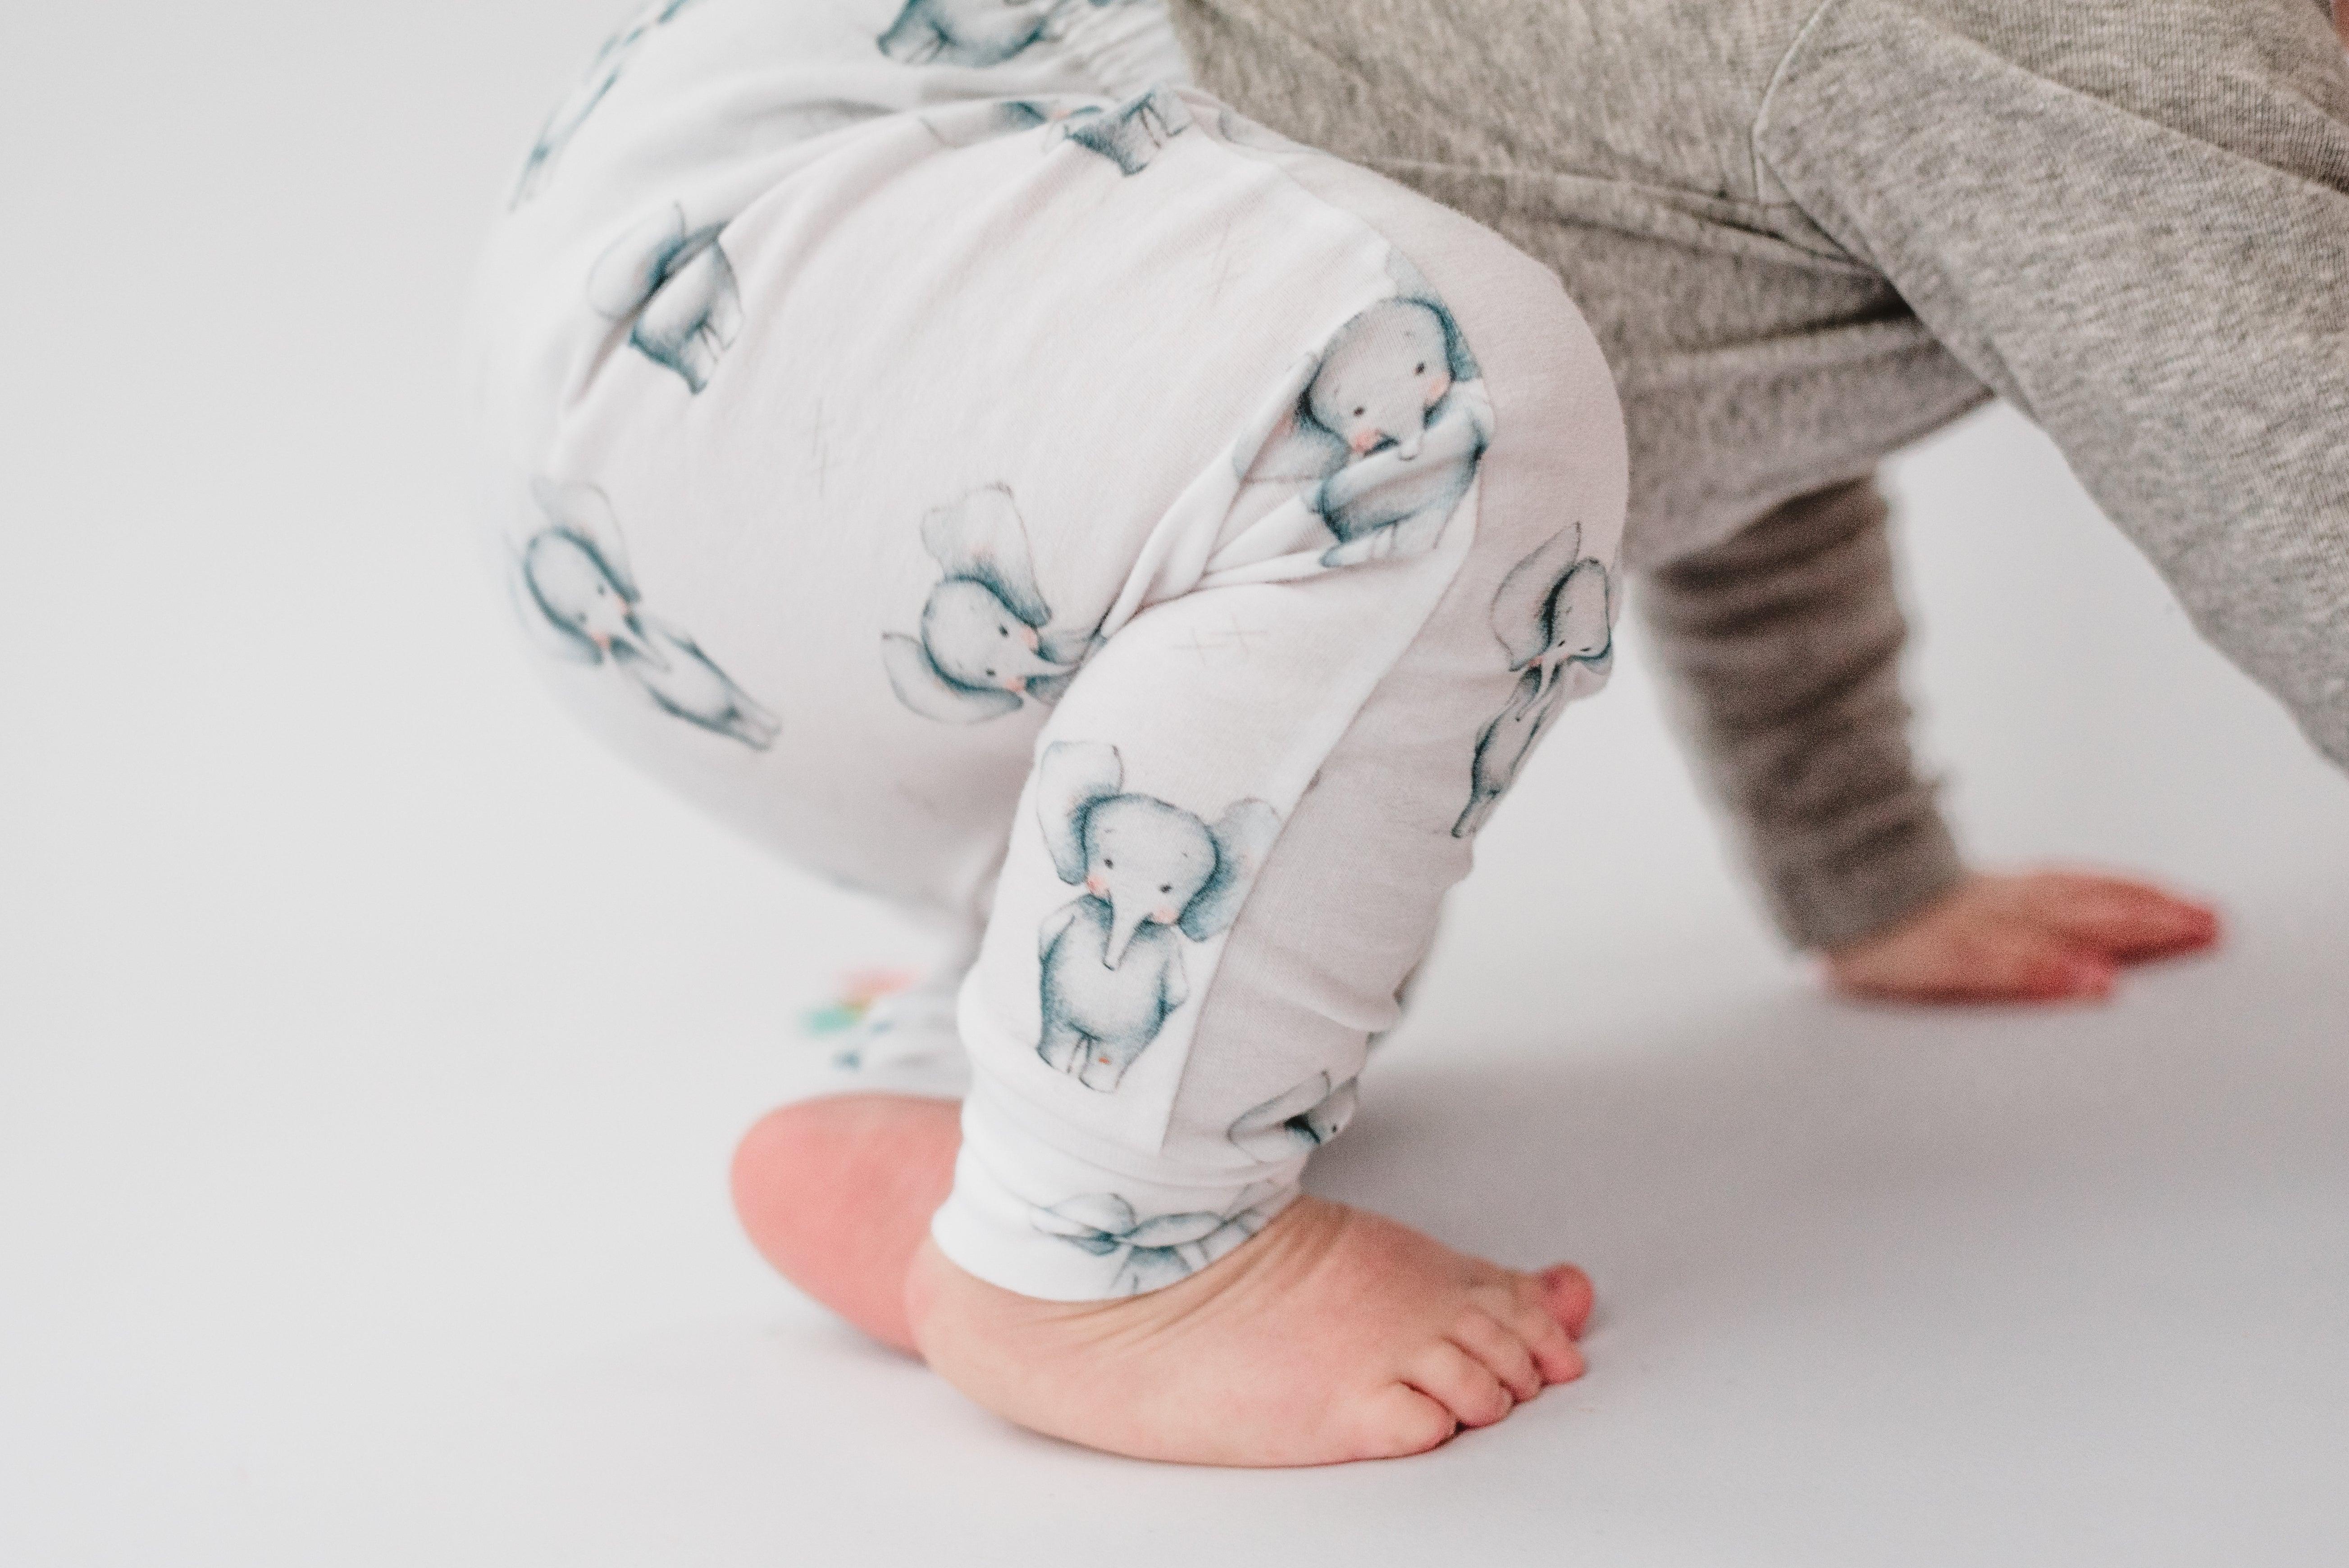 small + friendly: Free Sewing Patterns! Baby Leggings and Shorts